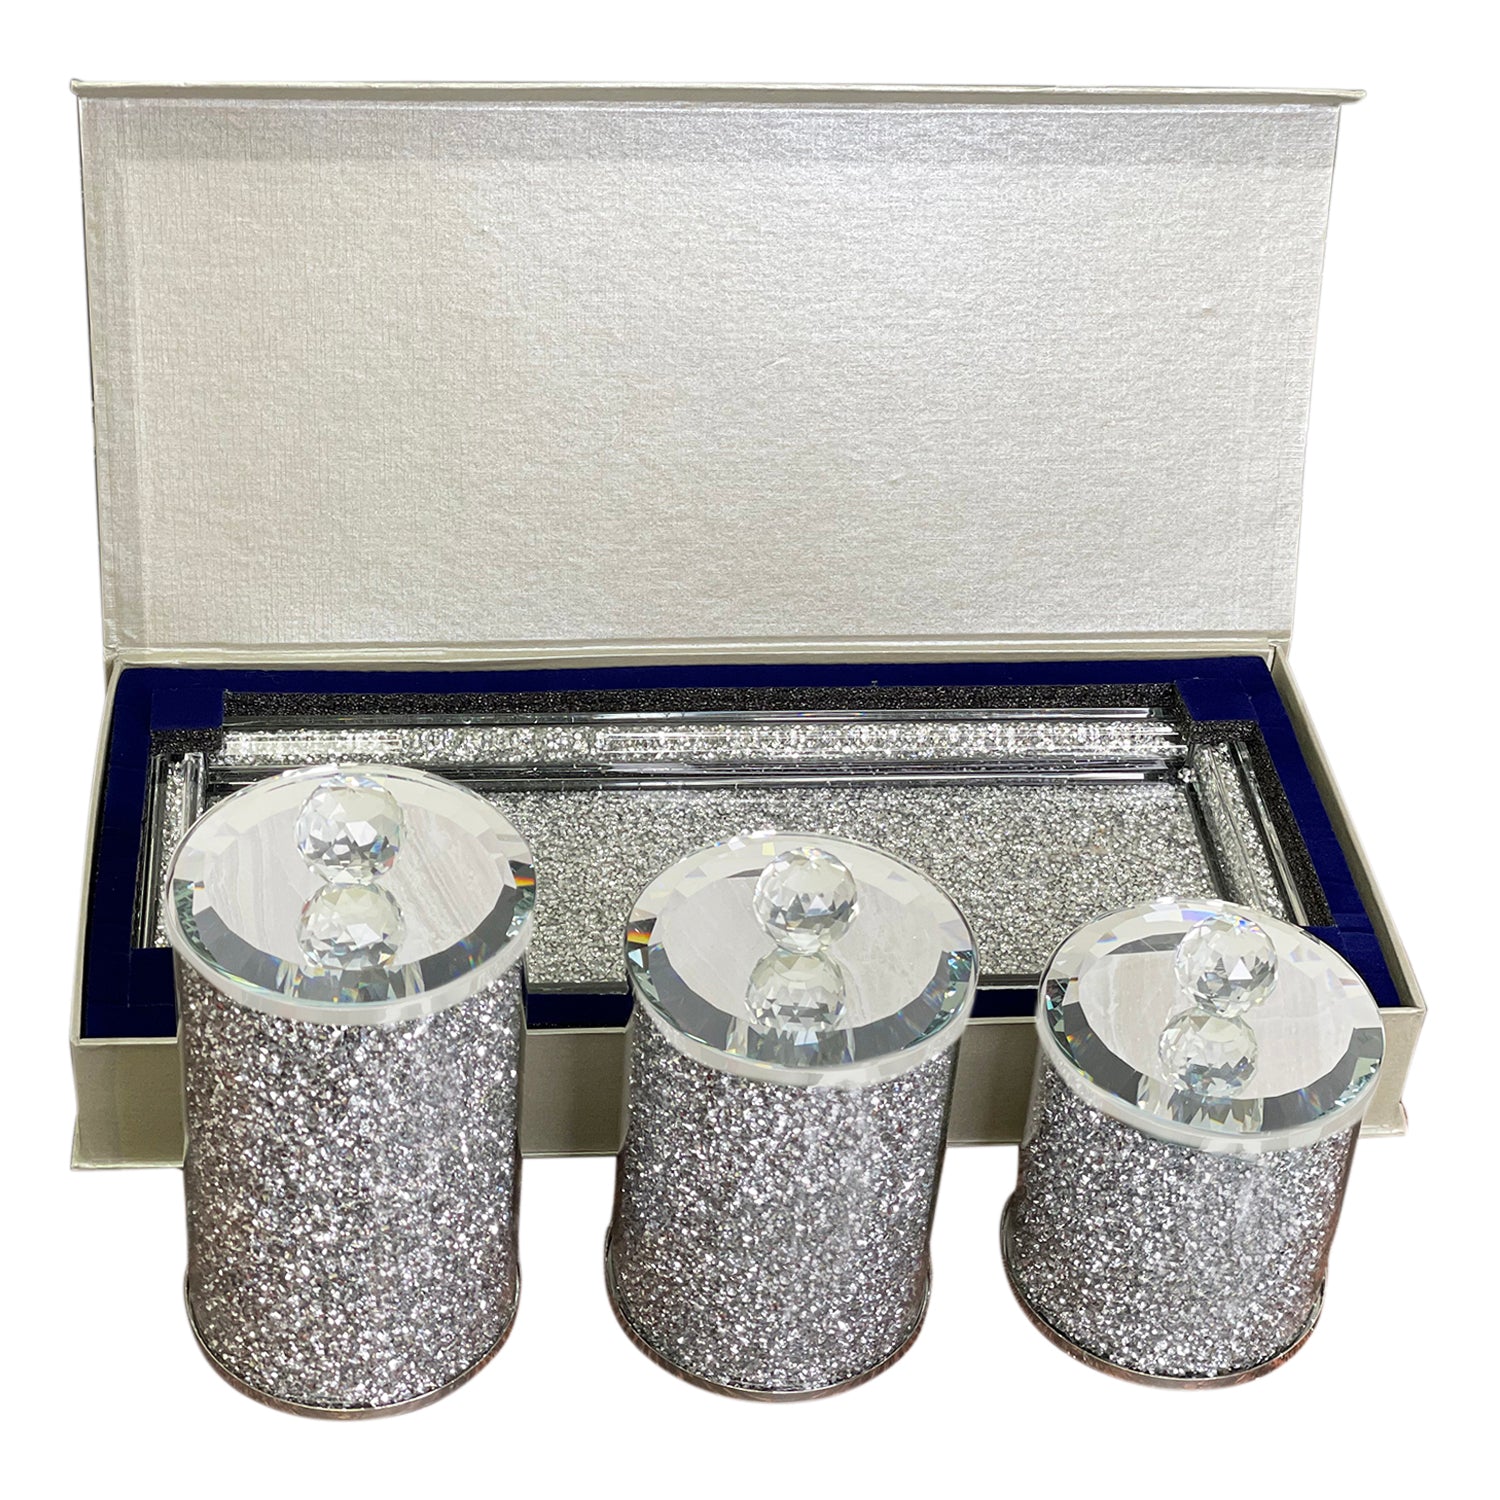 Ambrose Exquisite Three Glass Canister with Tray in silver-glass